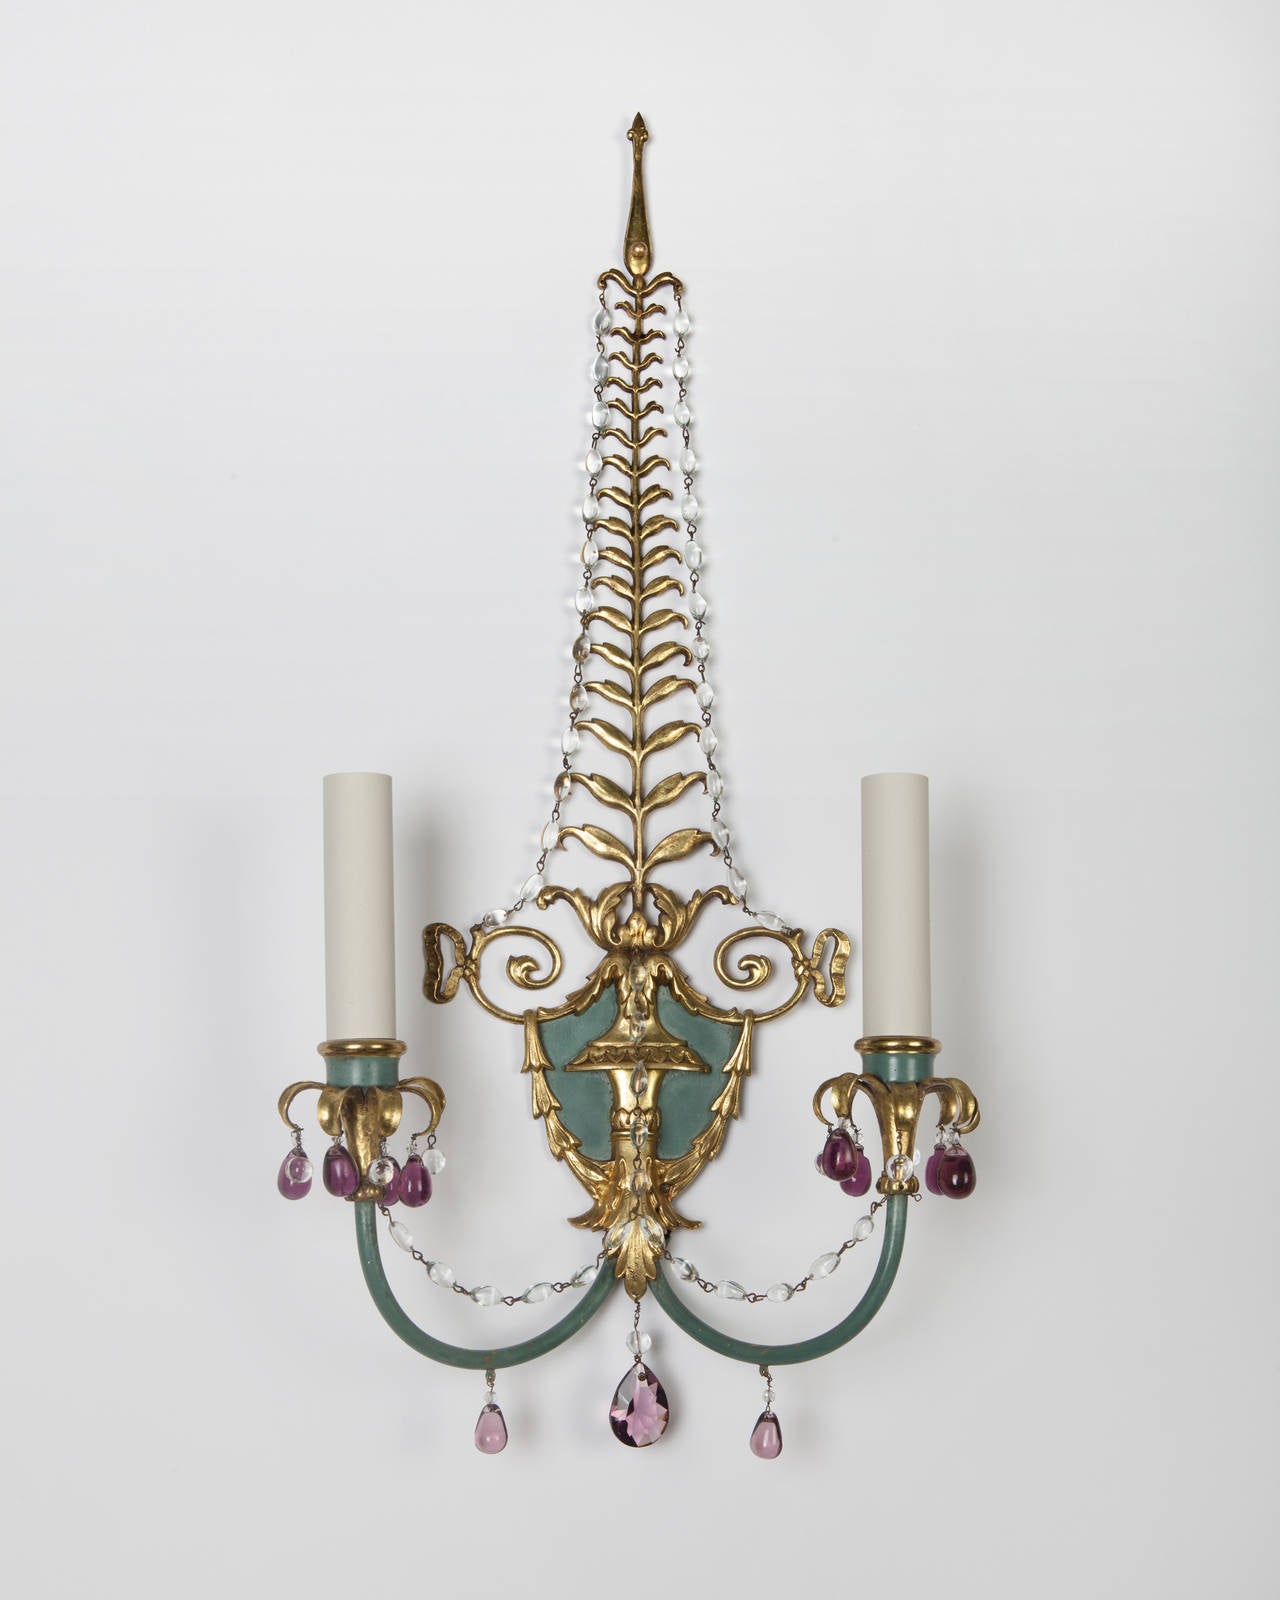 AIS2902

Circa 1920
A pair of antique double light sconces in their original gilded and enameled brass finish. Dressed with beaded swags and amethyst prisms. By the maker H. W. Kaufman Co.

Dimensions:
Overall: 23